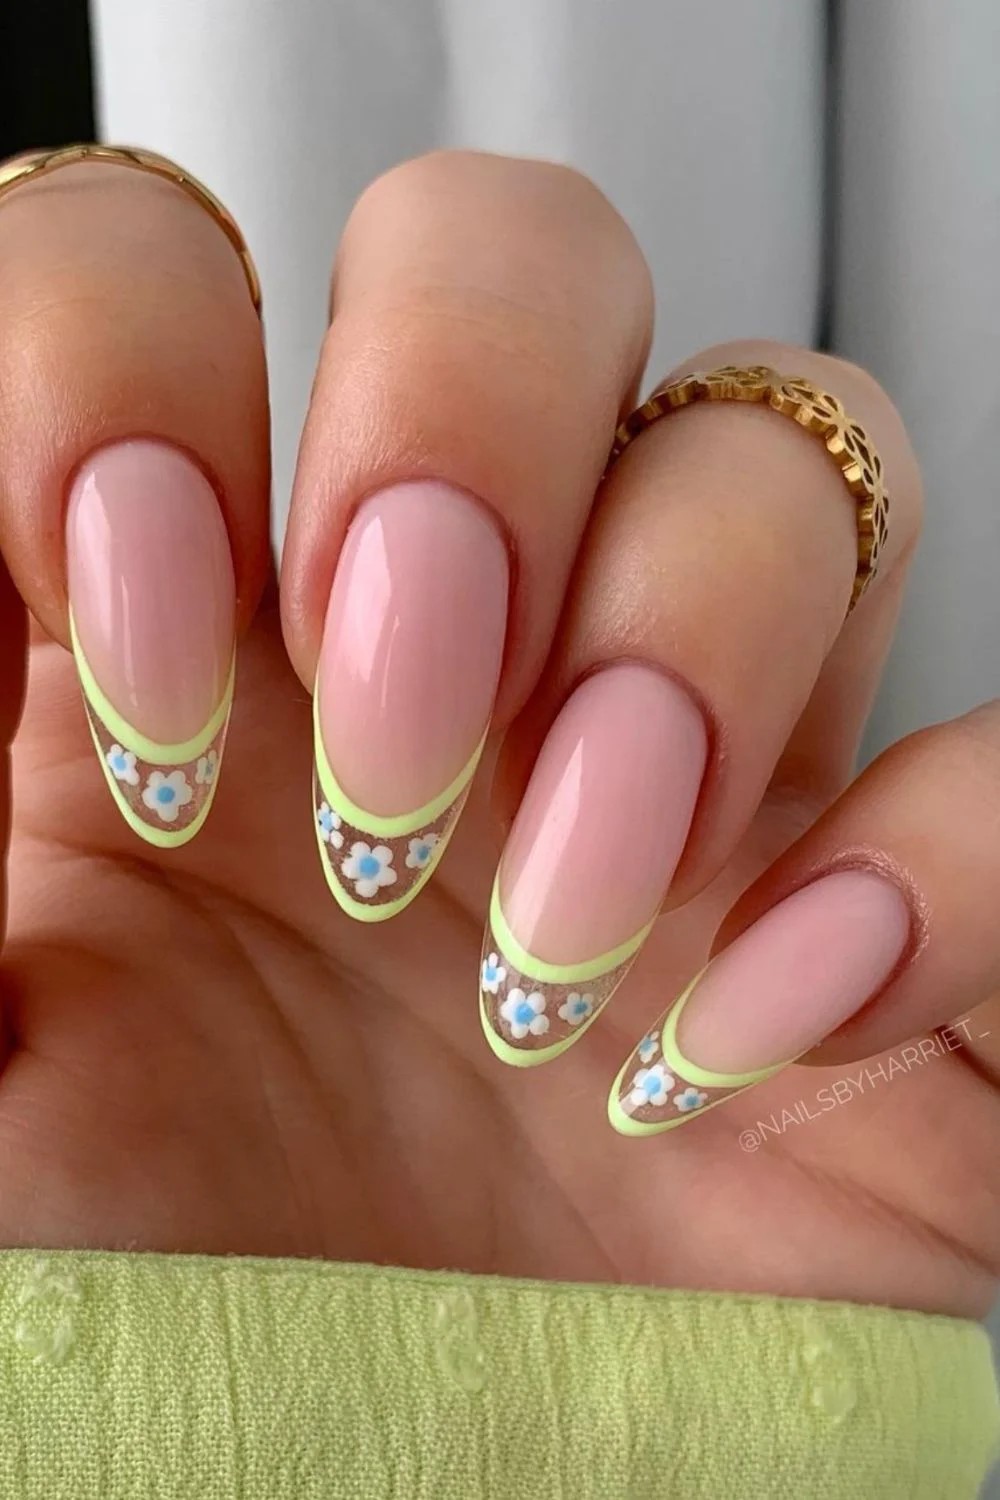 Neon French Tips with White Flowers